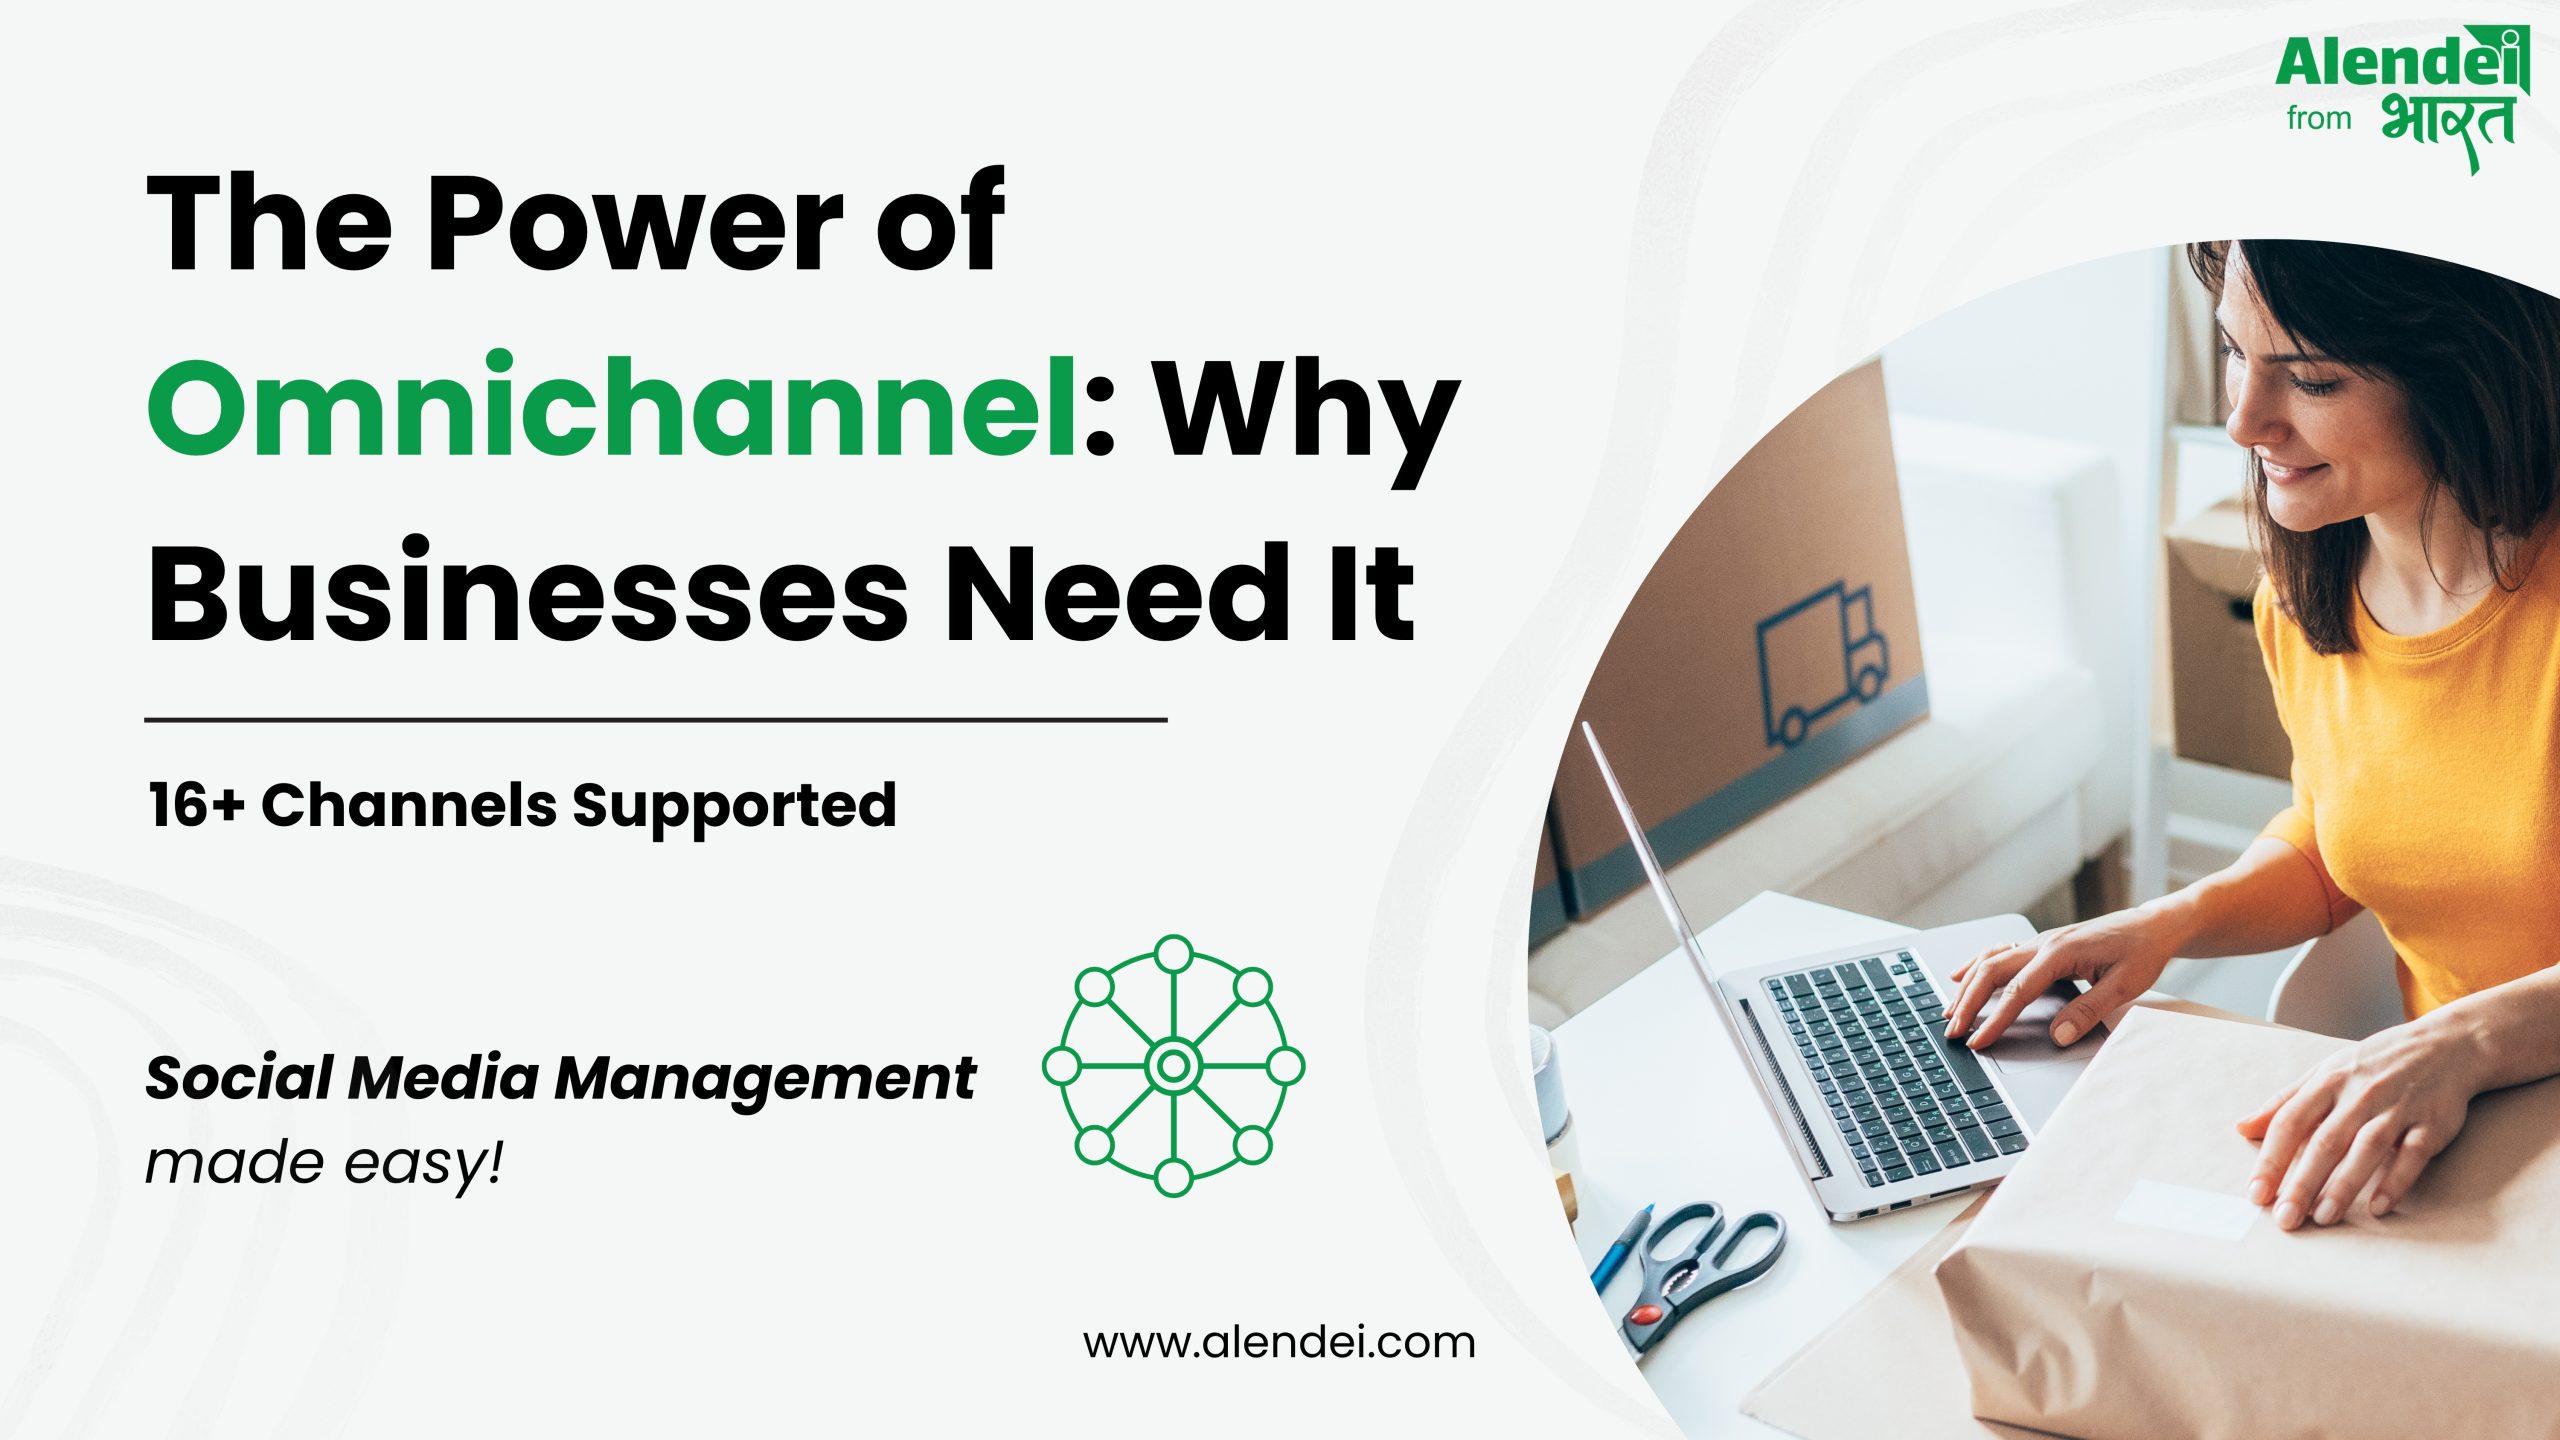 The Power of Omnichannel: Why Businesses Need It